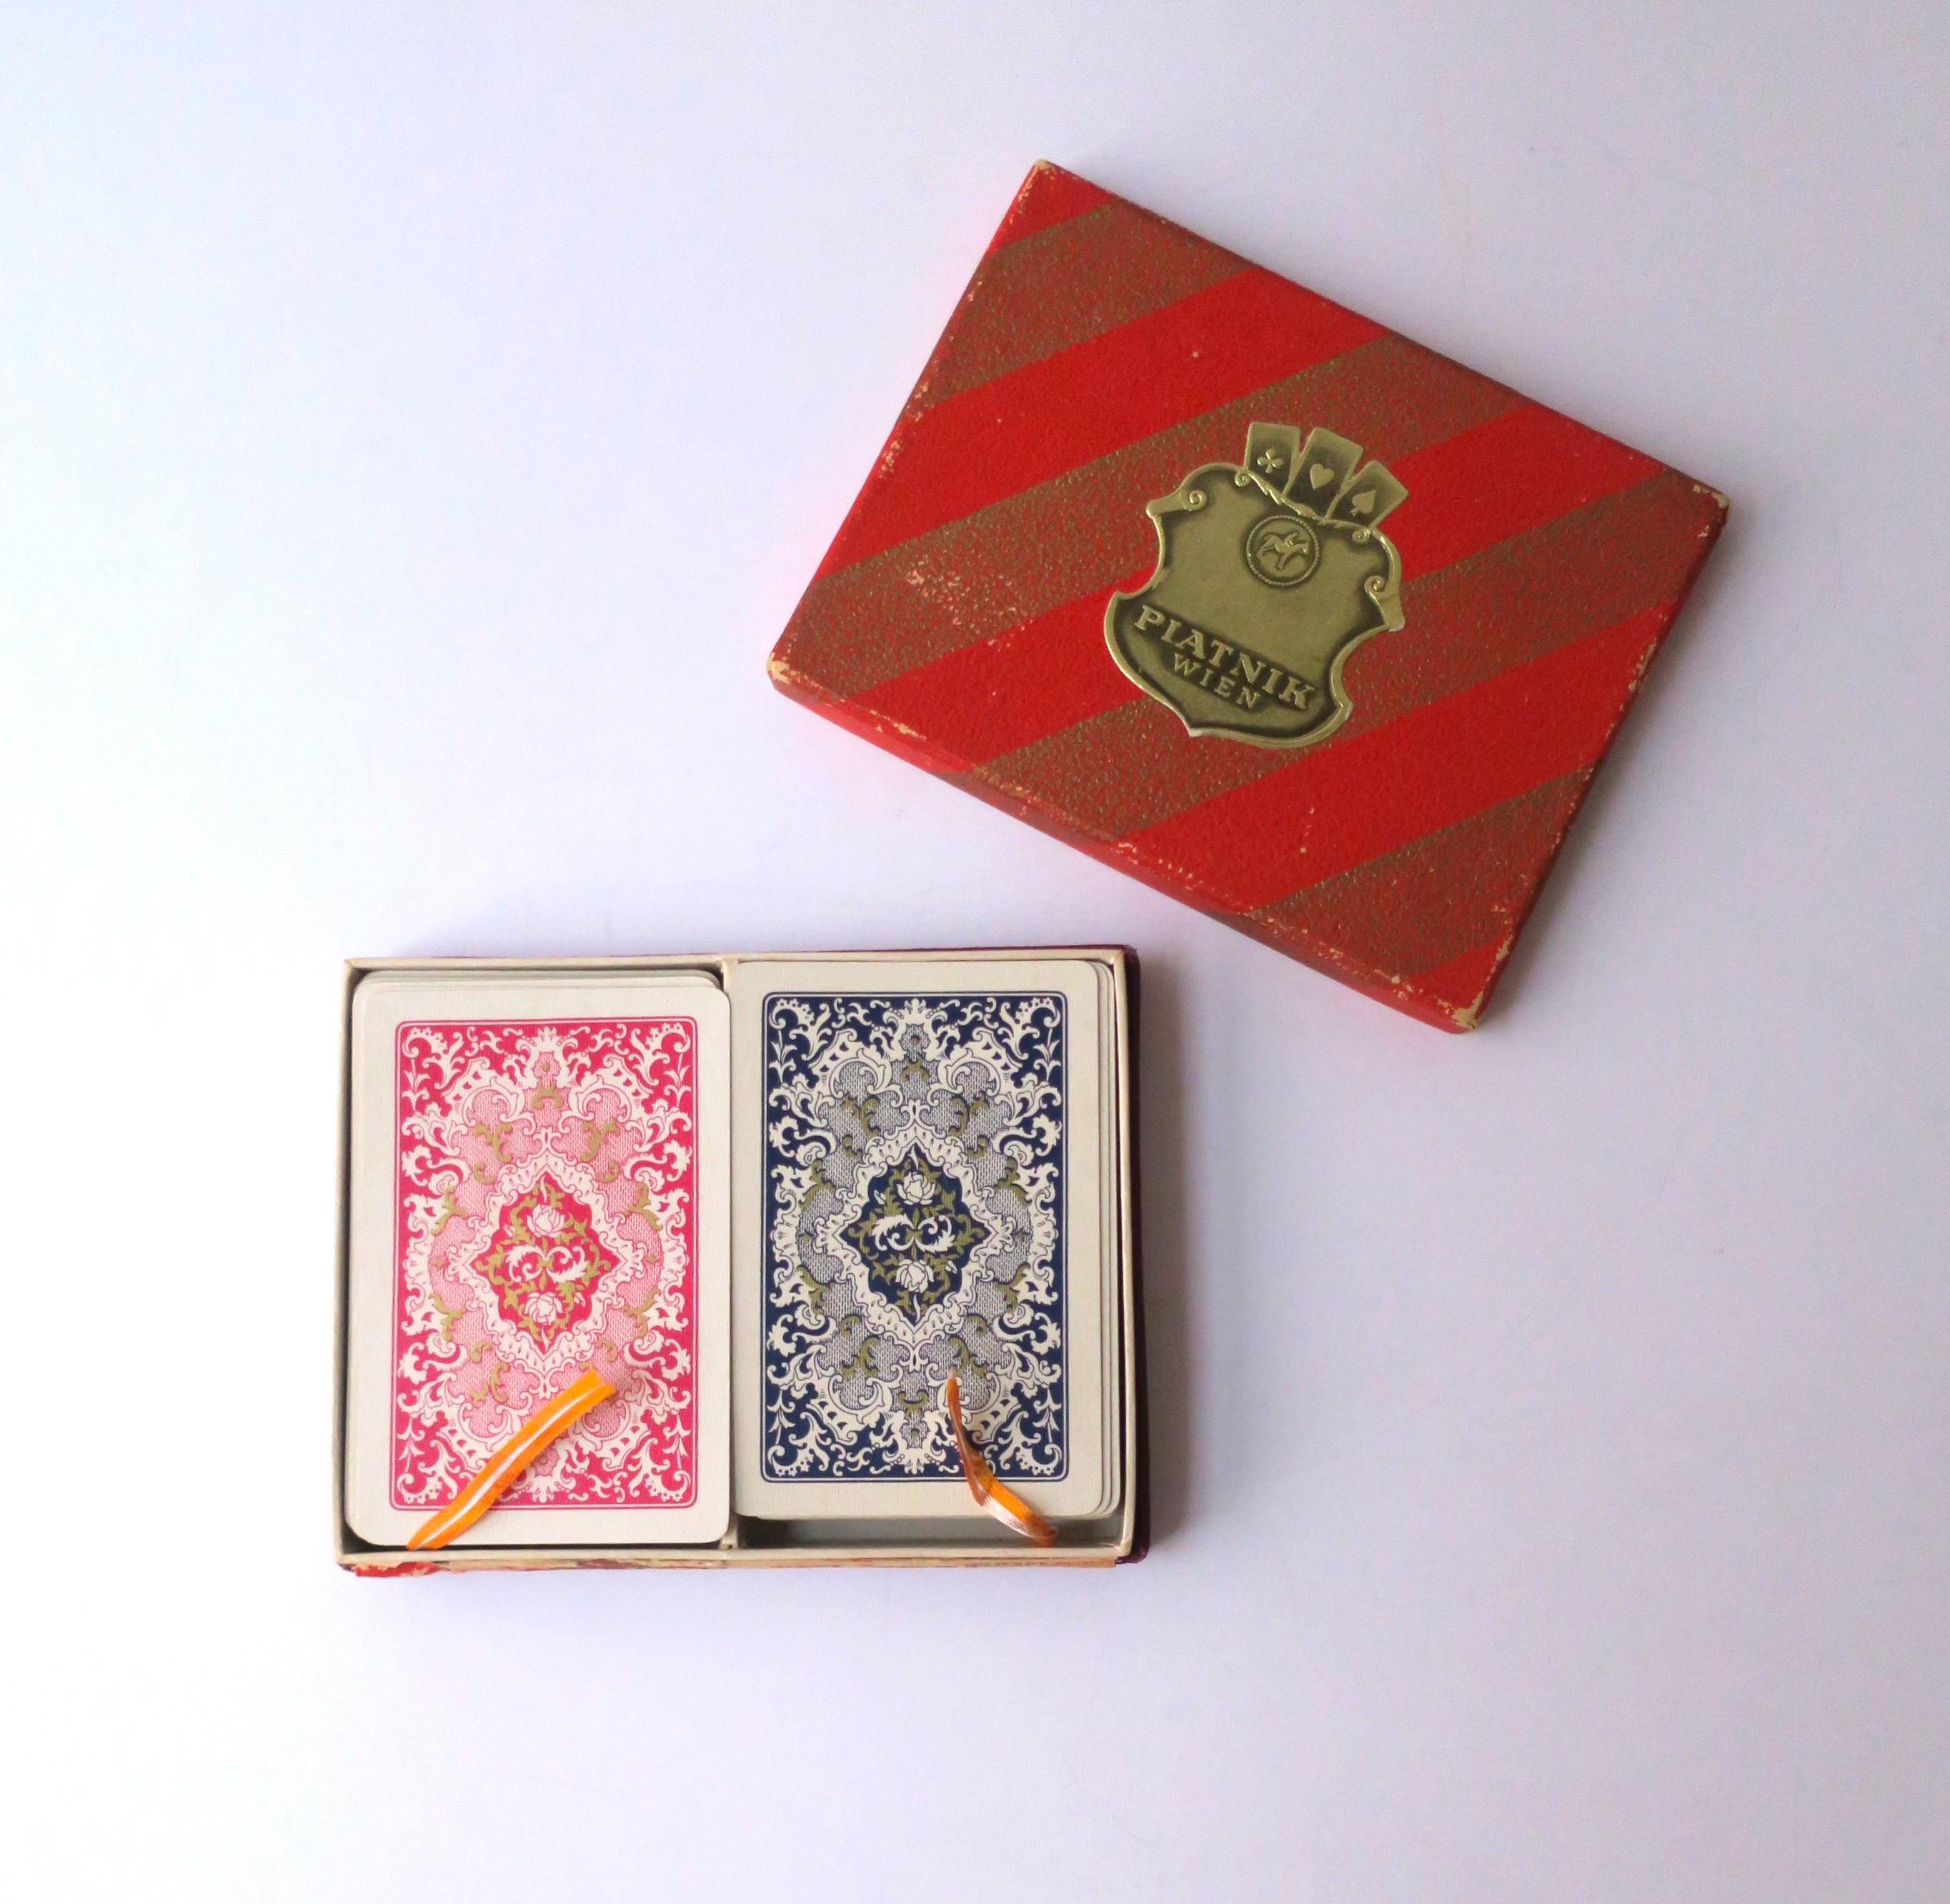 Two (2) complete playing card decks with original red box, circa ealry-20th century, Austria. Set includes two complete playing card decks in box with silk pulls for easy removal of cards. Box dimensions: 4.07